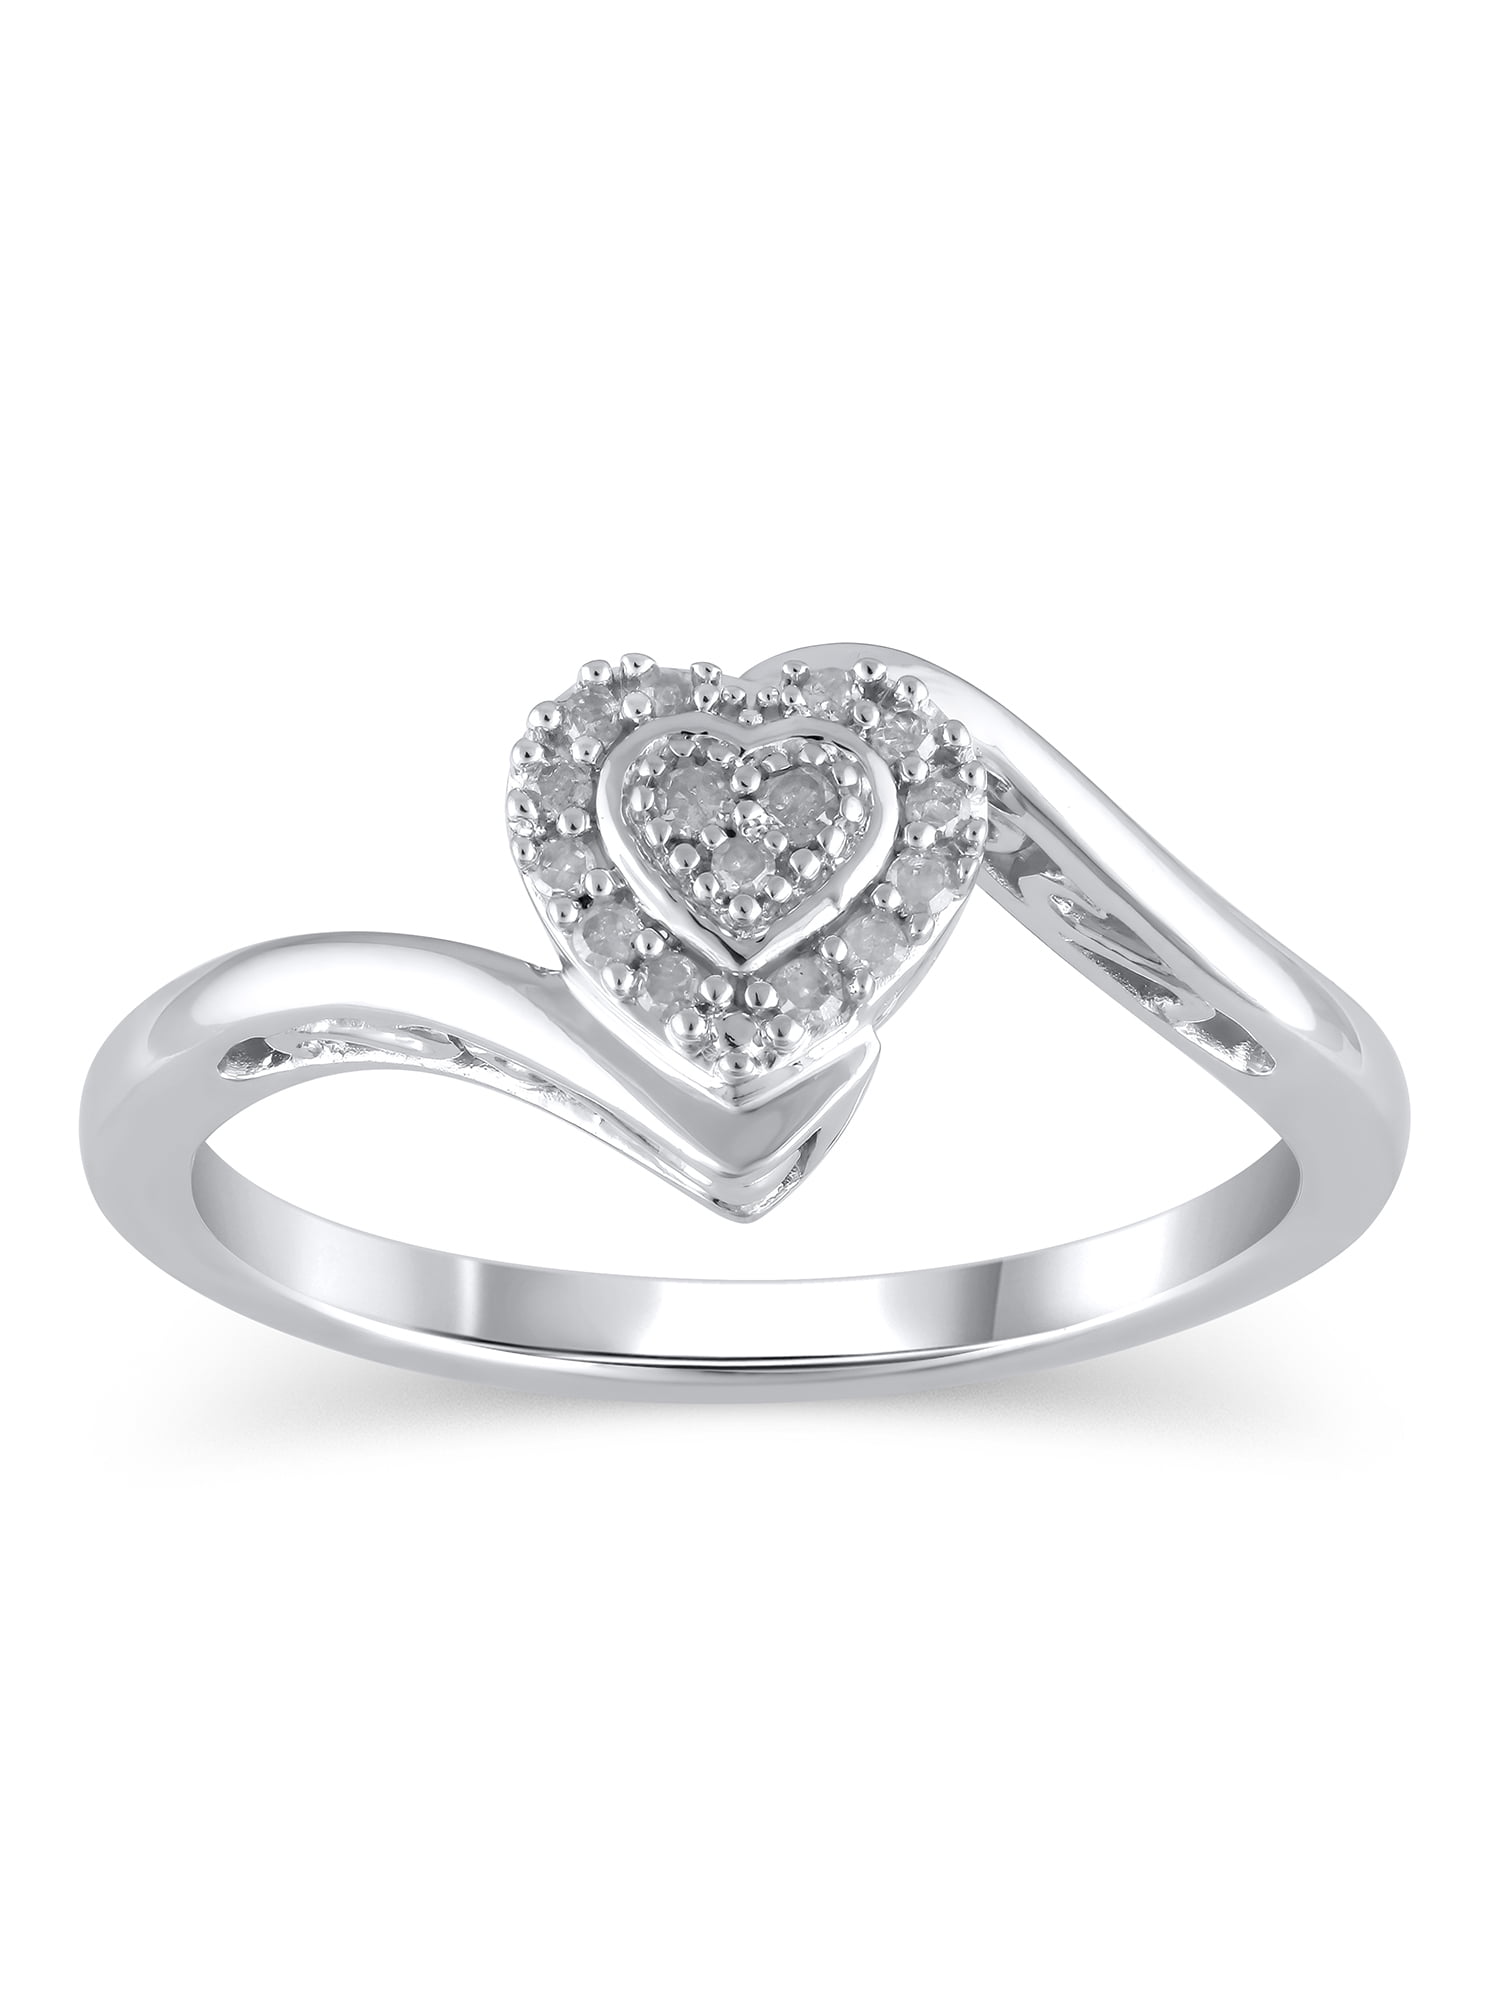 Diamond Accented Heart Promise Ring in 14K White Gold Over Size 9